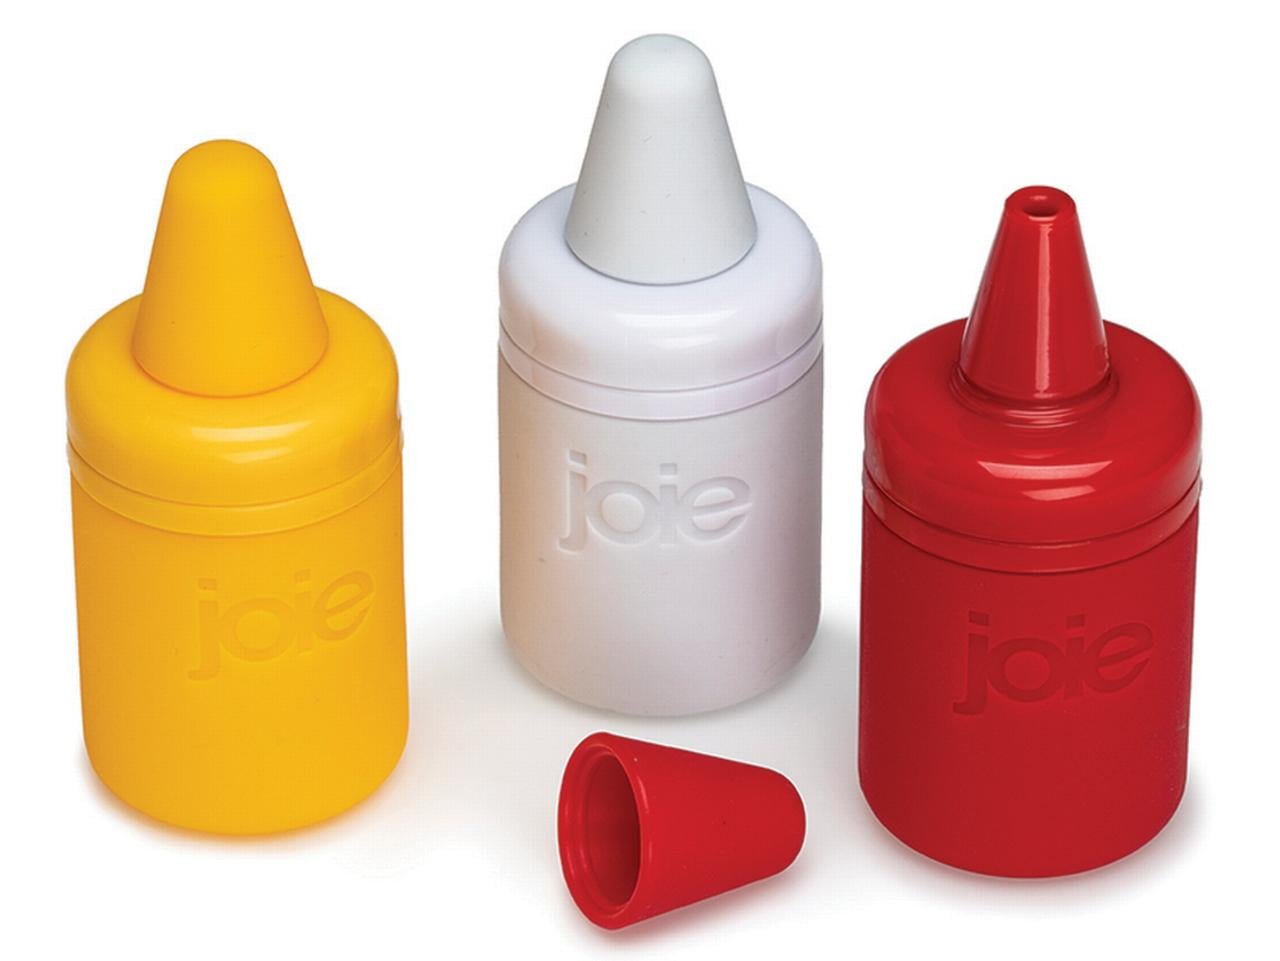 Joie Mini Condiment Containers, 3pc Set for Ketchup, Mustard, and Mayo, Refillable Red, White, and Yellow Bottles